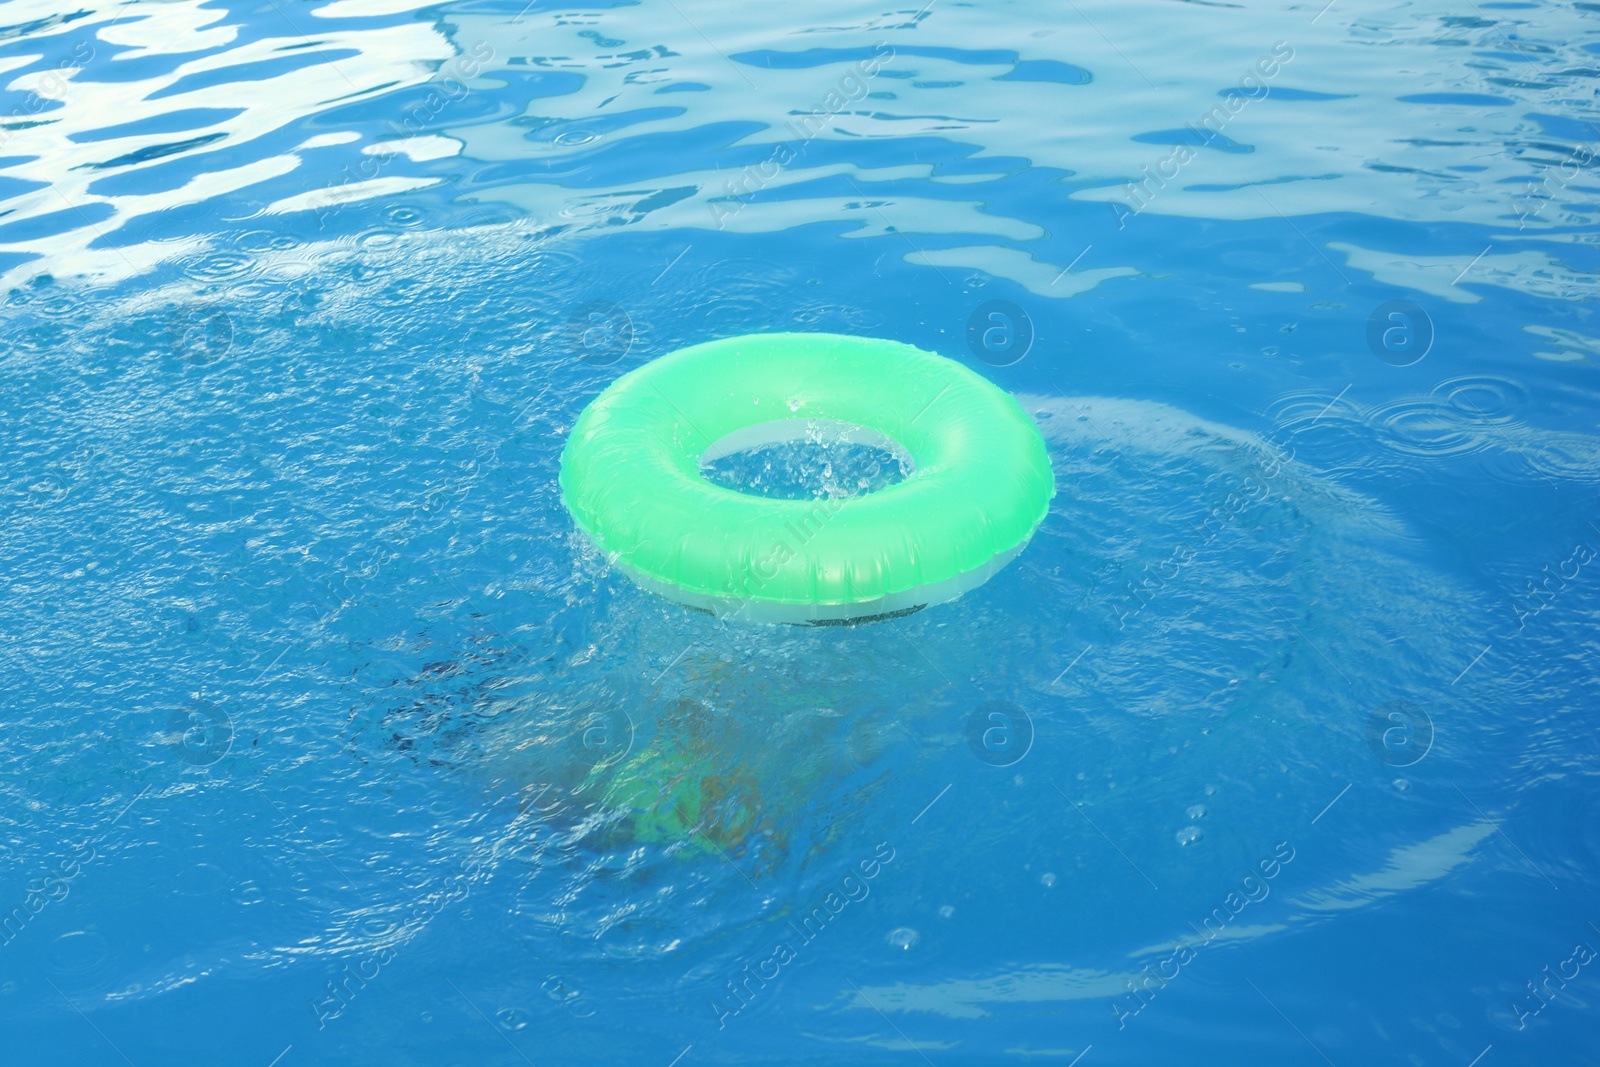 Photo of Little child with inflatable ring in outdoor swimming pool. Dangerous situation